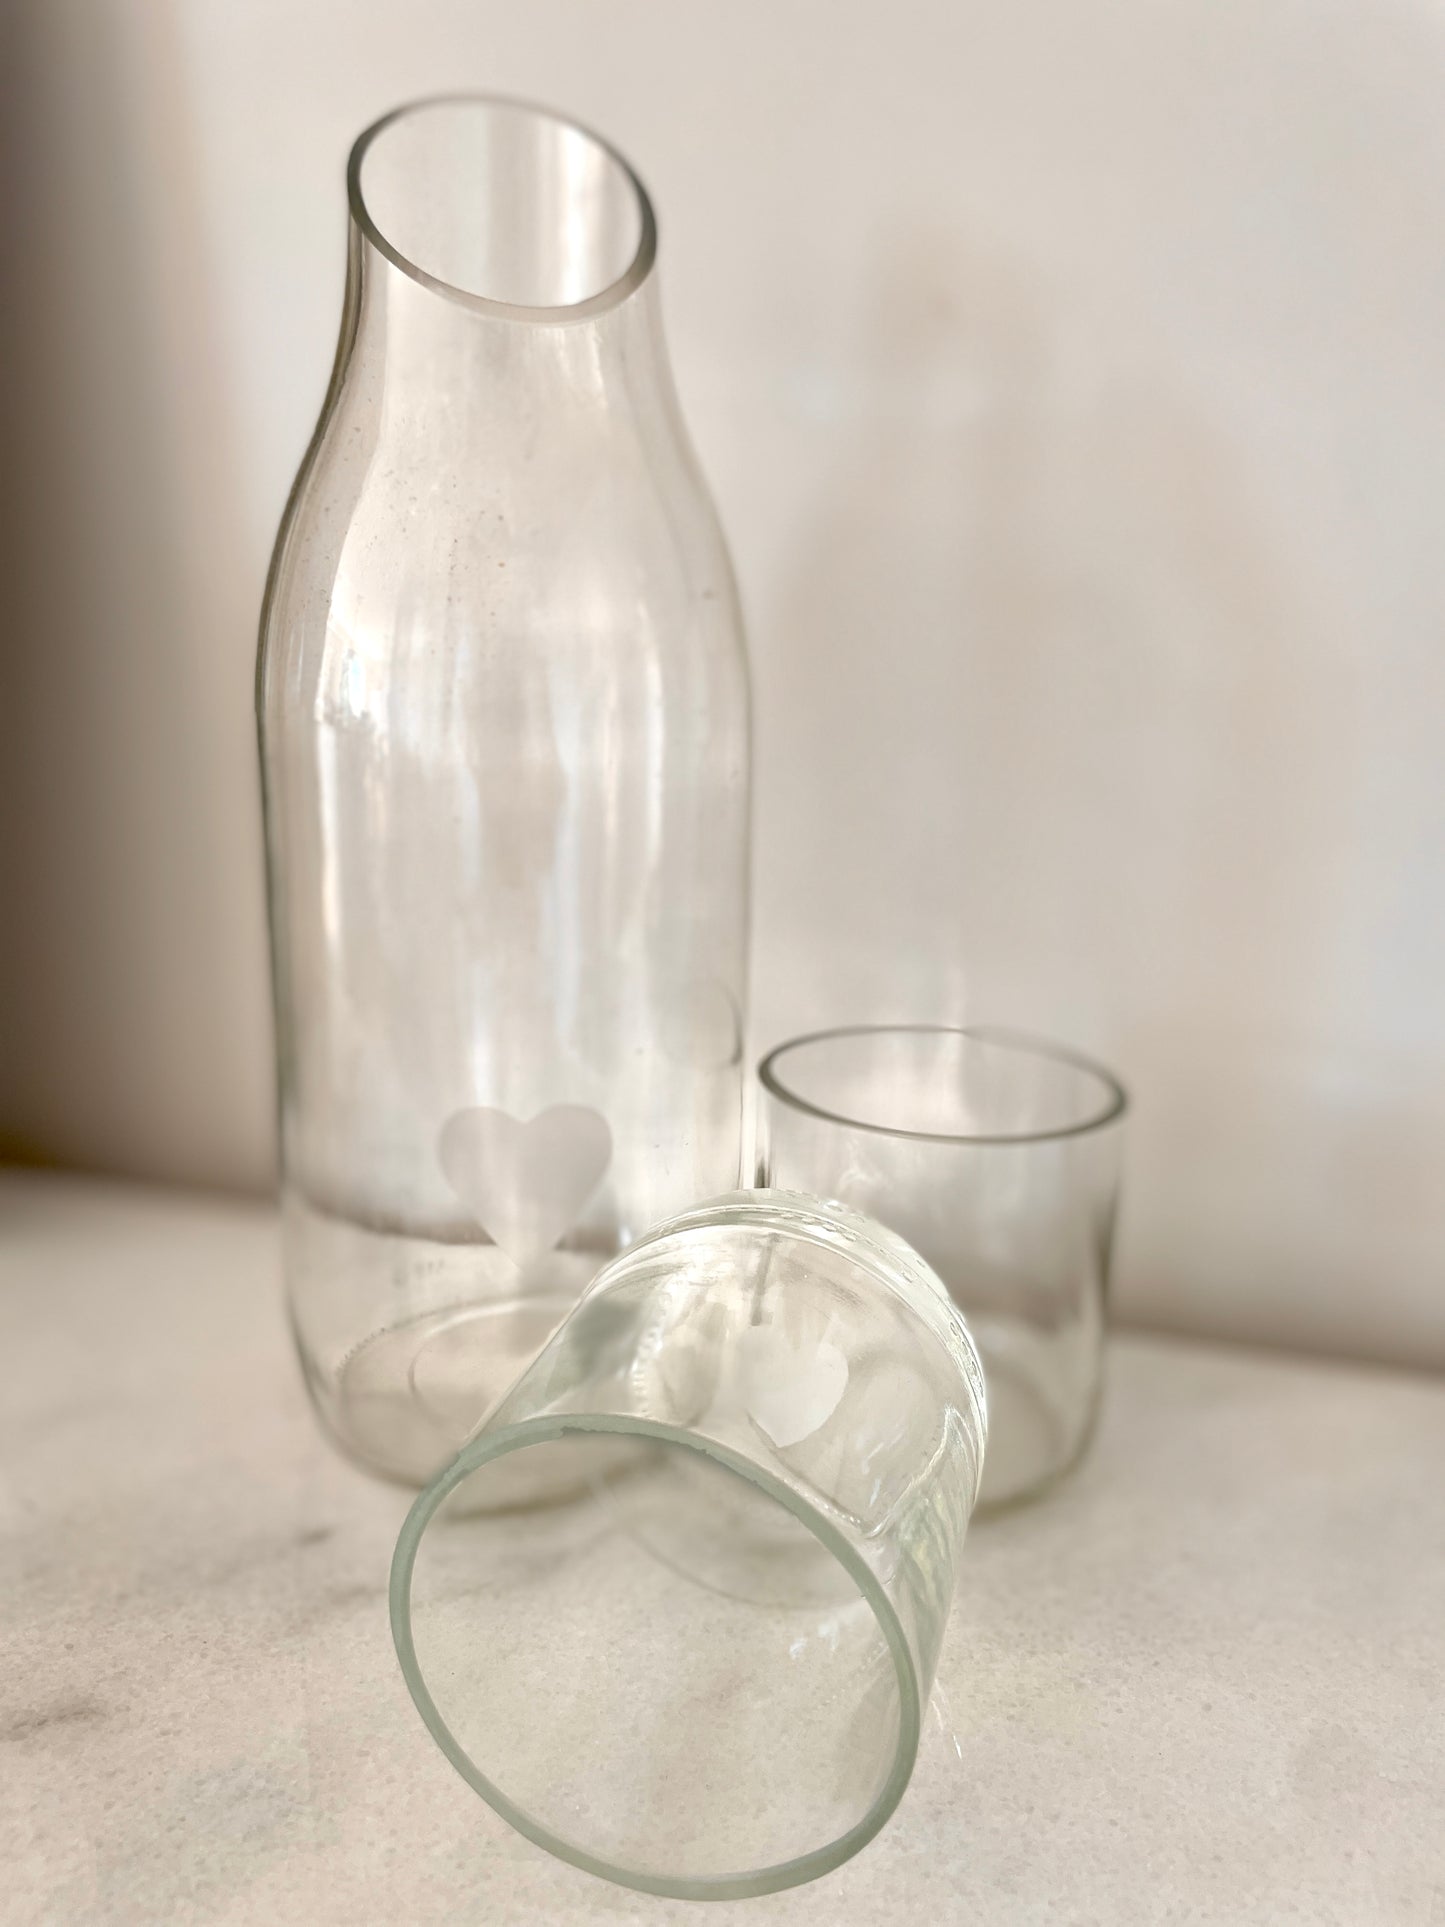 Bottle and two glasses set